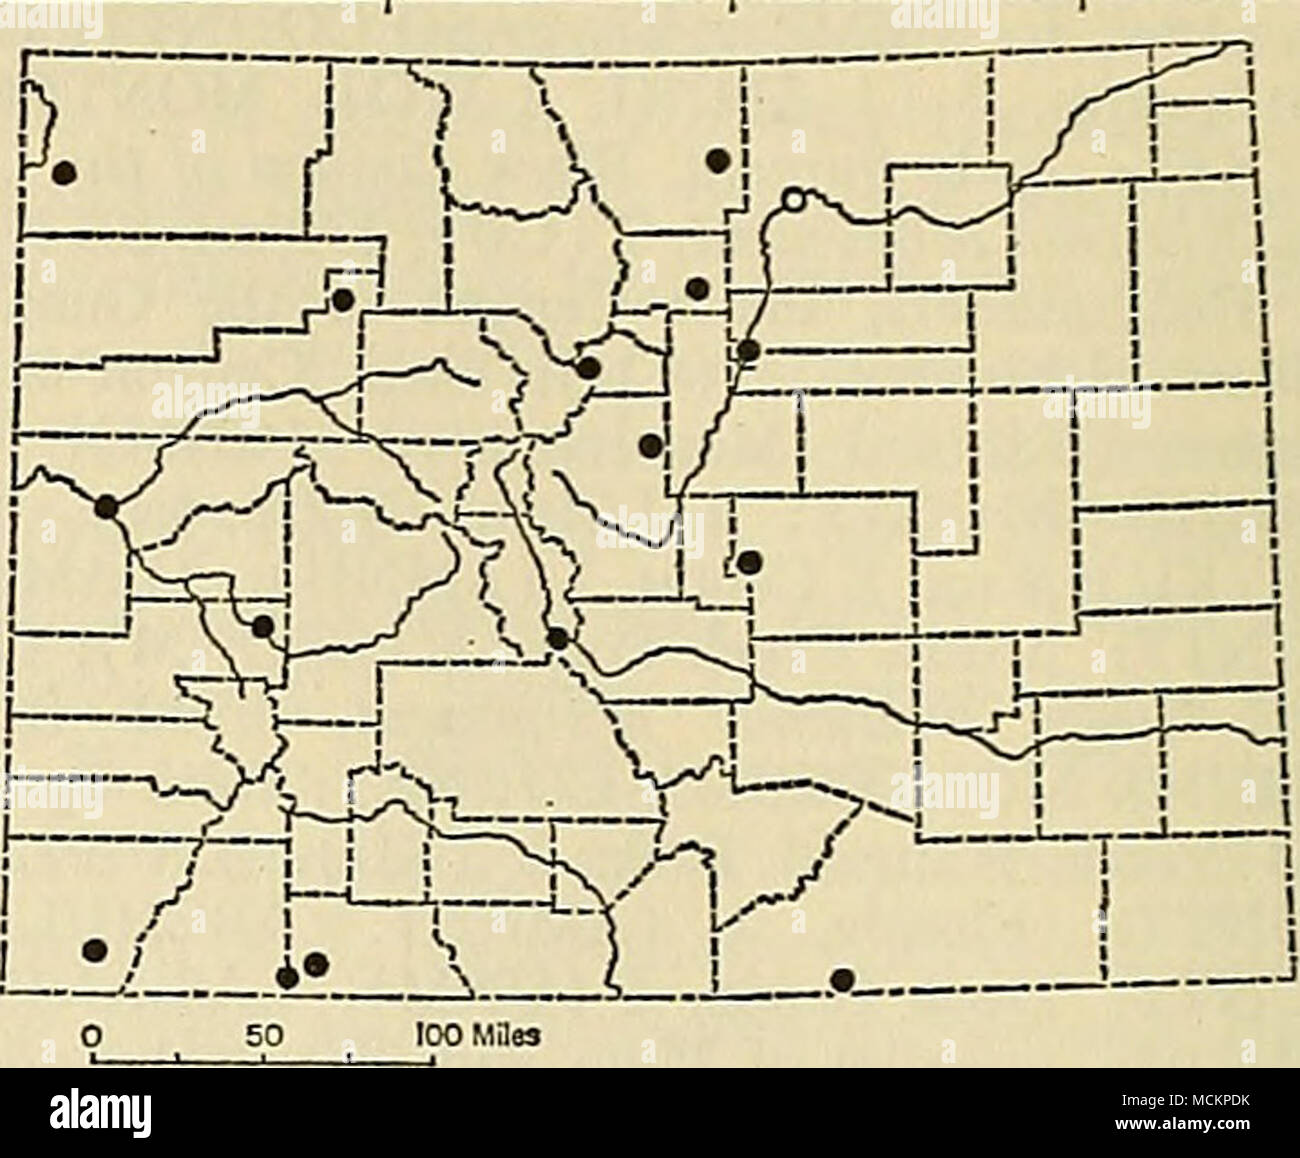 . Fig. 28. Distribution of Lasiurus cinereus cinereus in Colorado. For explanation of symbols, see p. 9. Measurements. — Mean (and extreme) measurements of 28 males from 2 1/2 mi. S of Estabrook, Park County, are: 133.1 (123- 142), 53.4 (51-60), 11.1 (9-12), 16.5 (13-18), 52.33 (50.0-55.6); weight, 27.41 (24.3-32.1). A. M. Railey (1937) reported a lactating fe- male taken on 25 June 1936 that weighed 20.8; her two suckling male offspring weighed 13.87 and 14.12. For cranial measurements, see table 4. Records of occurrence.—Specimens examined, 66, distributed as follows: MOFFAT COUNTY: Castle P Stock Photo